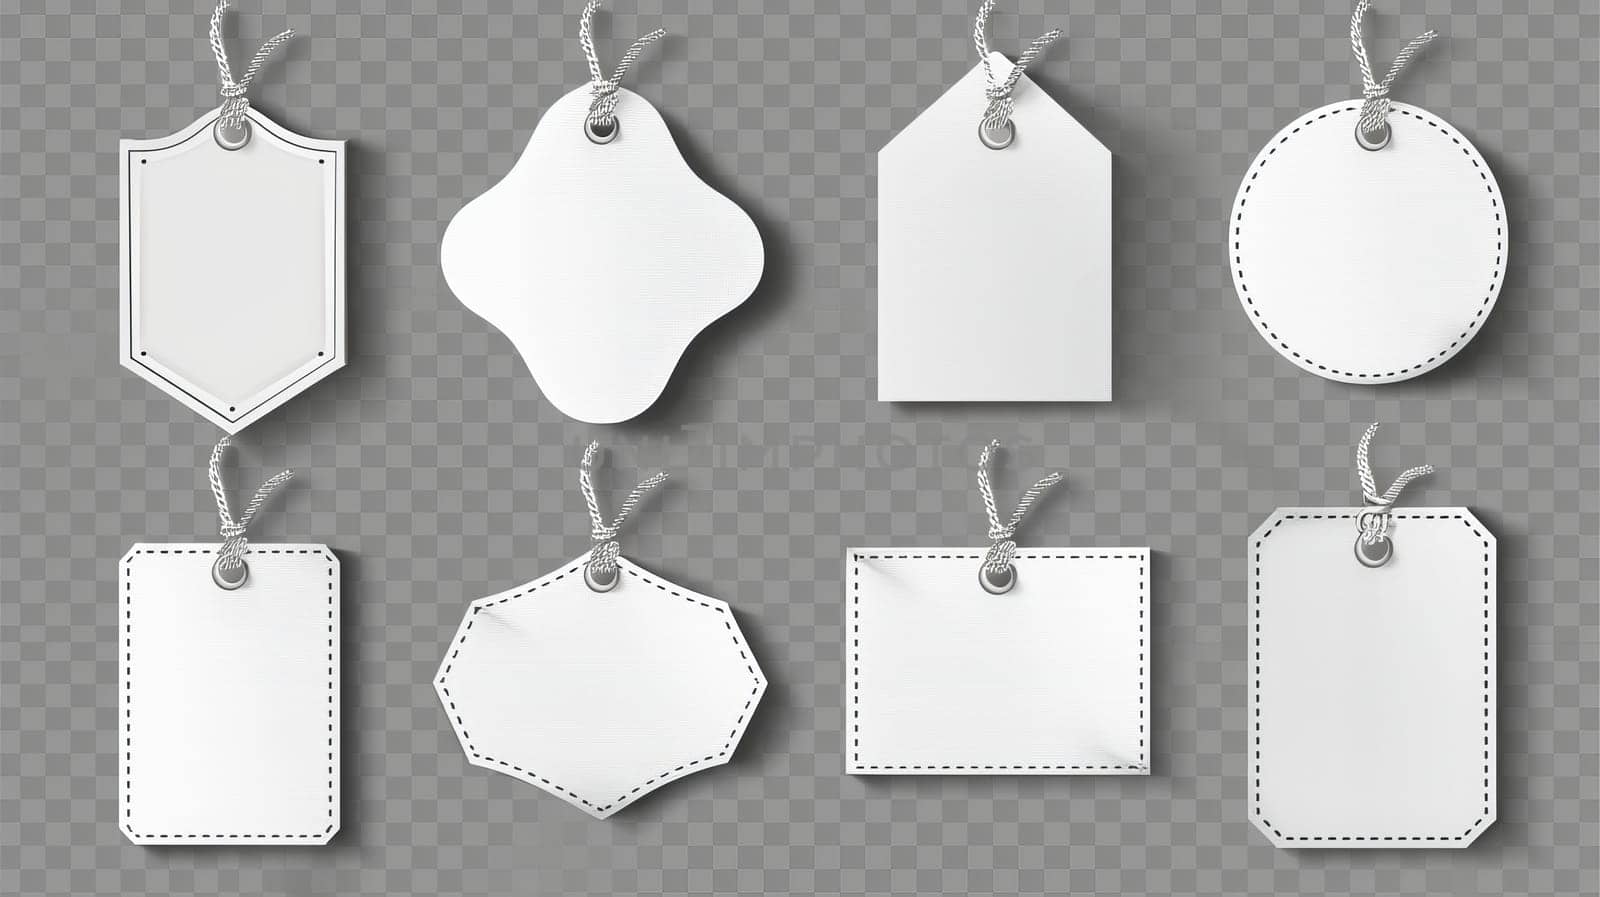 A modern realistic mockup of blank cloth labels with stitches, cotton badges for textiles, and woven fashion stickers on a transparent background.